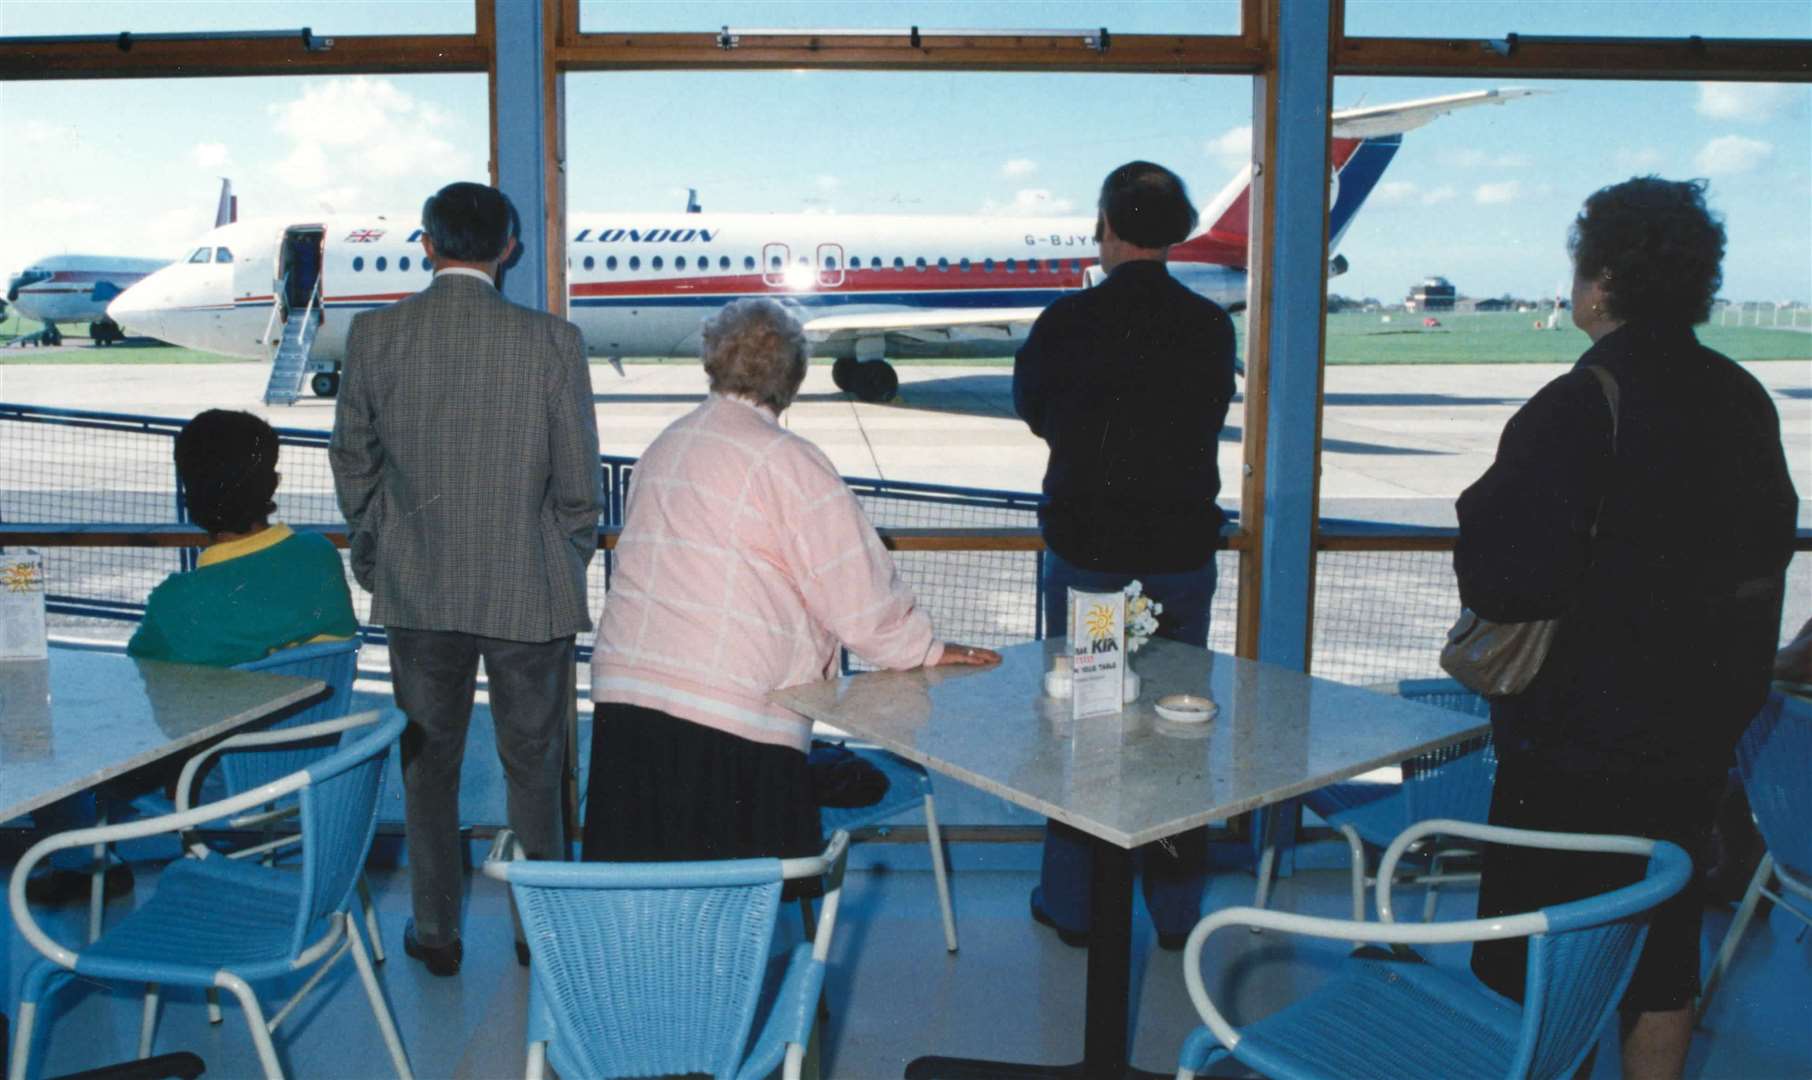 The lounge in Manston Airport in 1990